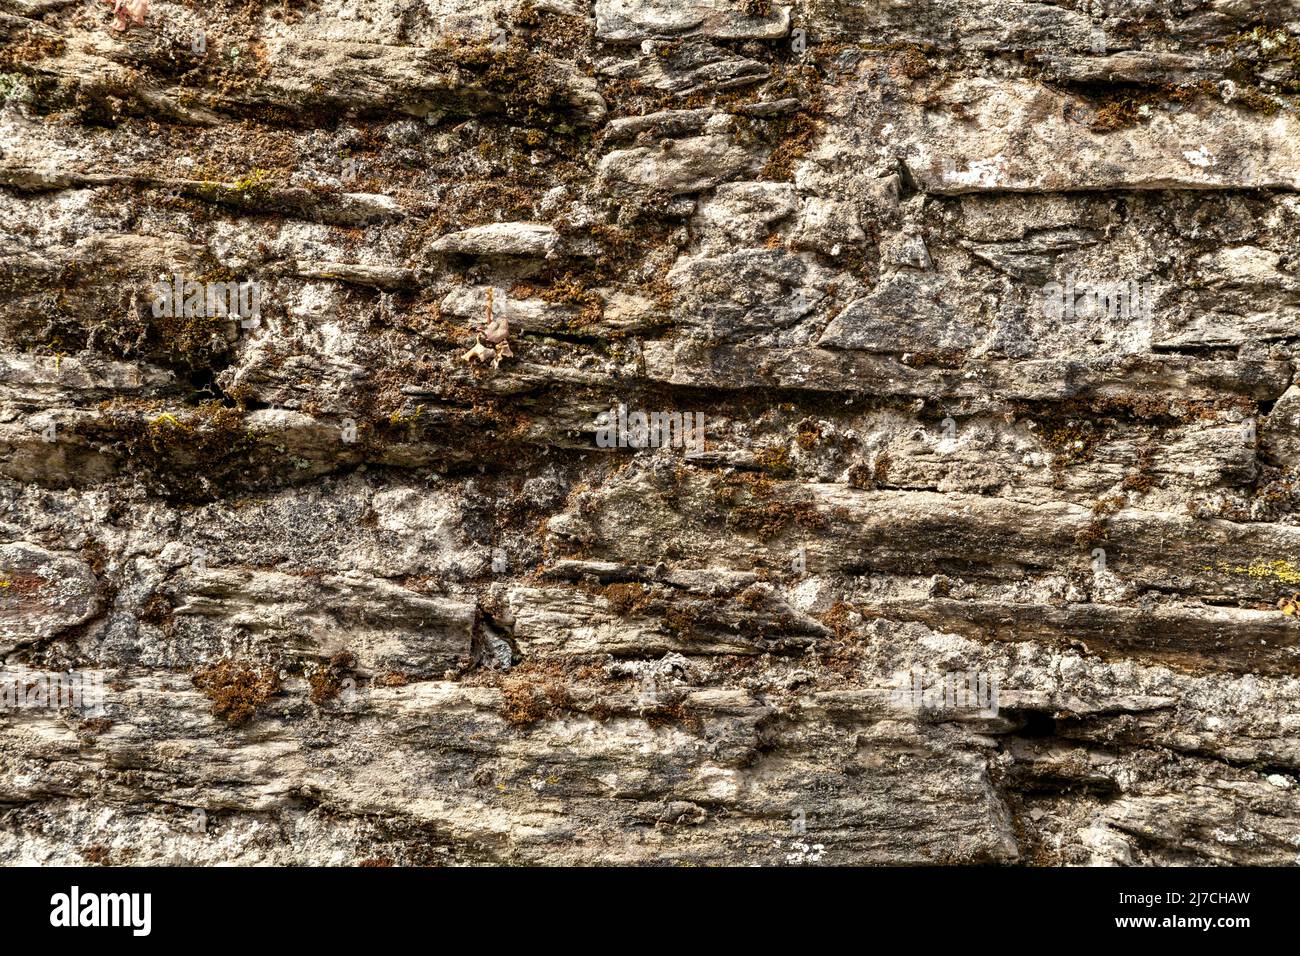 Stone wall with green moss Stock Photo